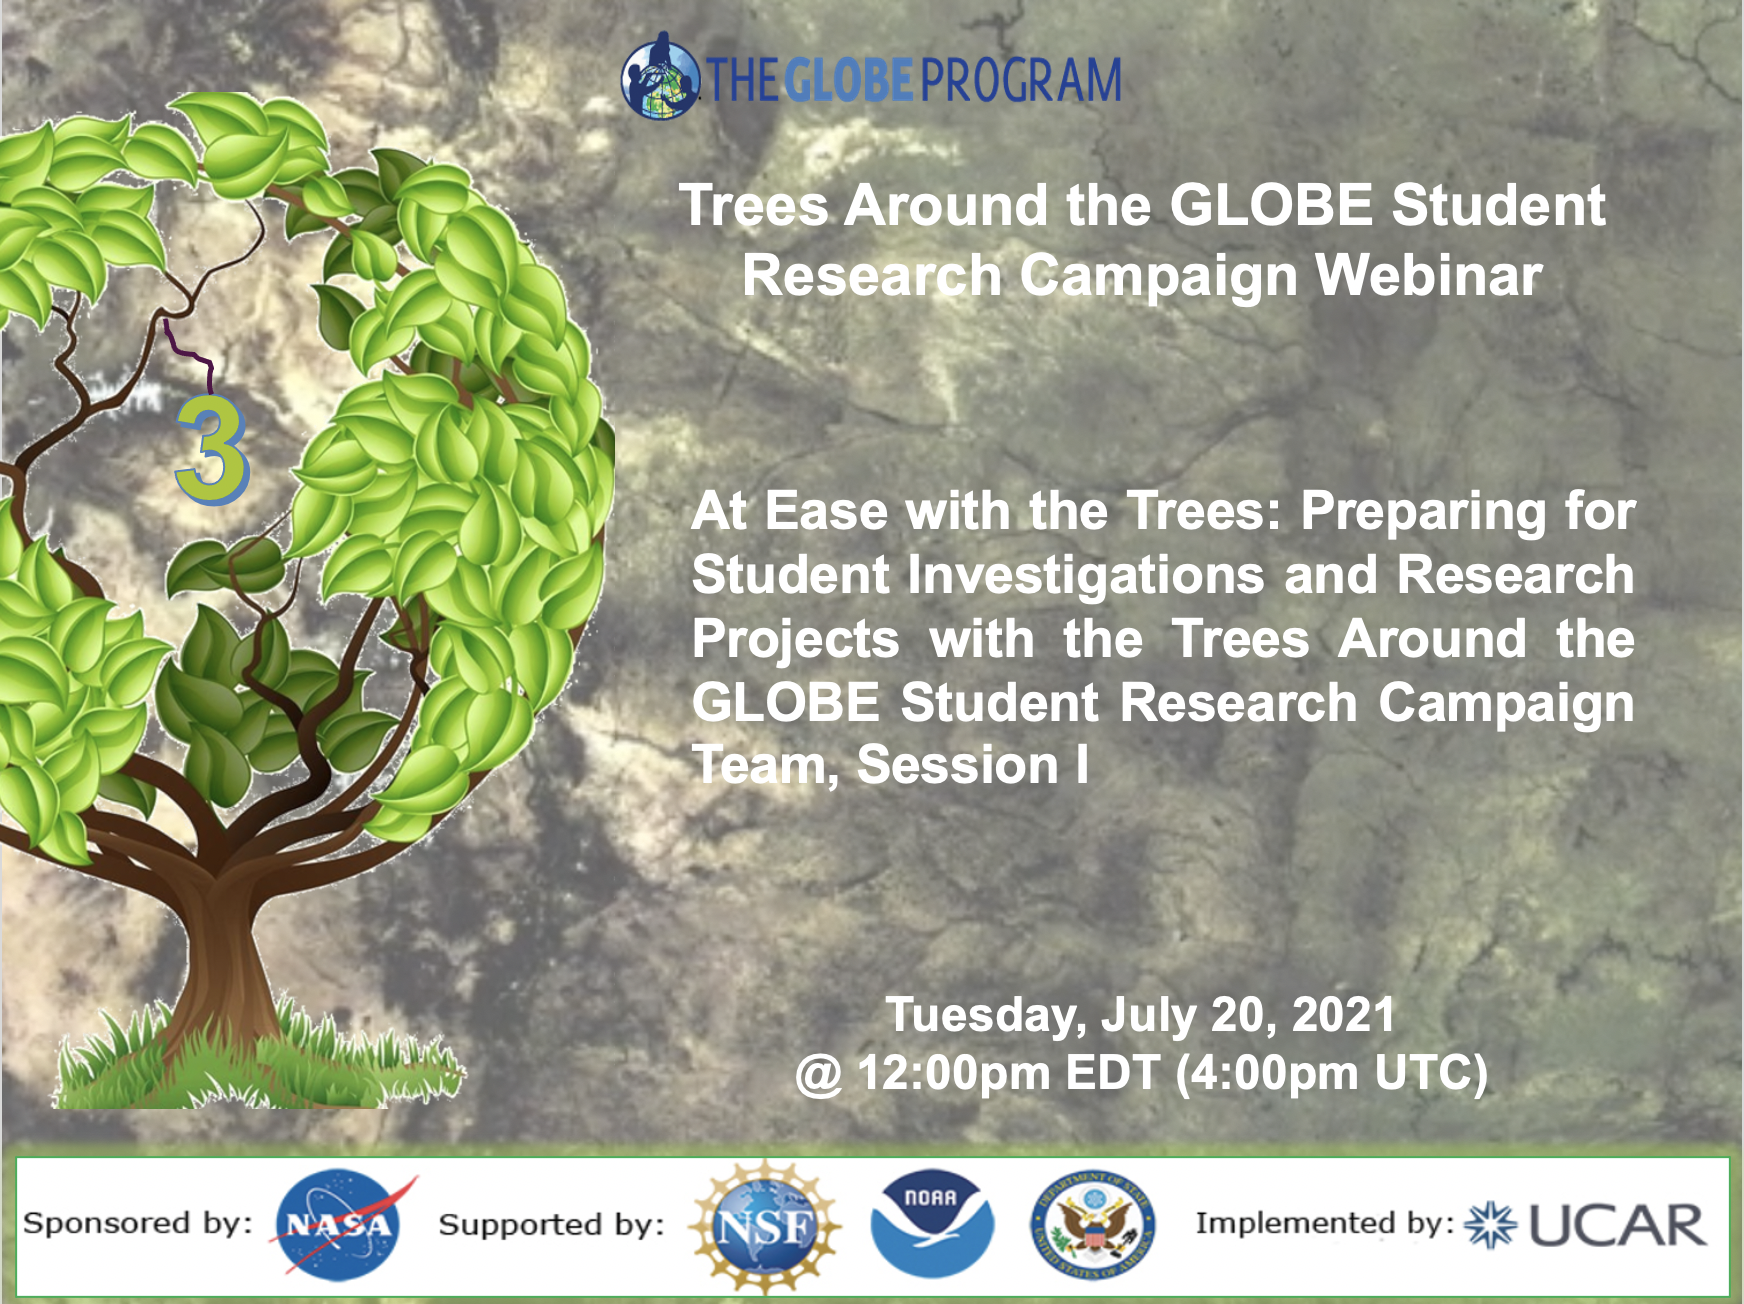 Trees Around the GLOBE 20 July webinar shareable, with a tree in the background and satellite photo of Earth